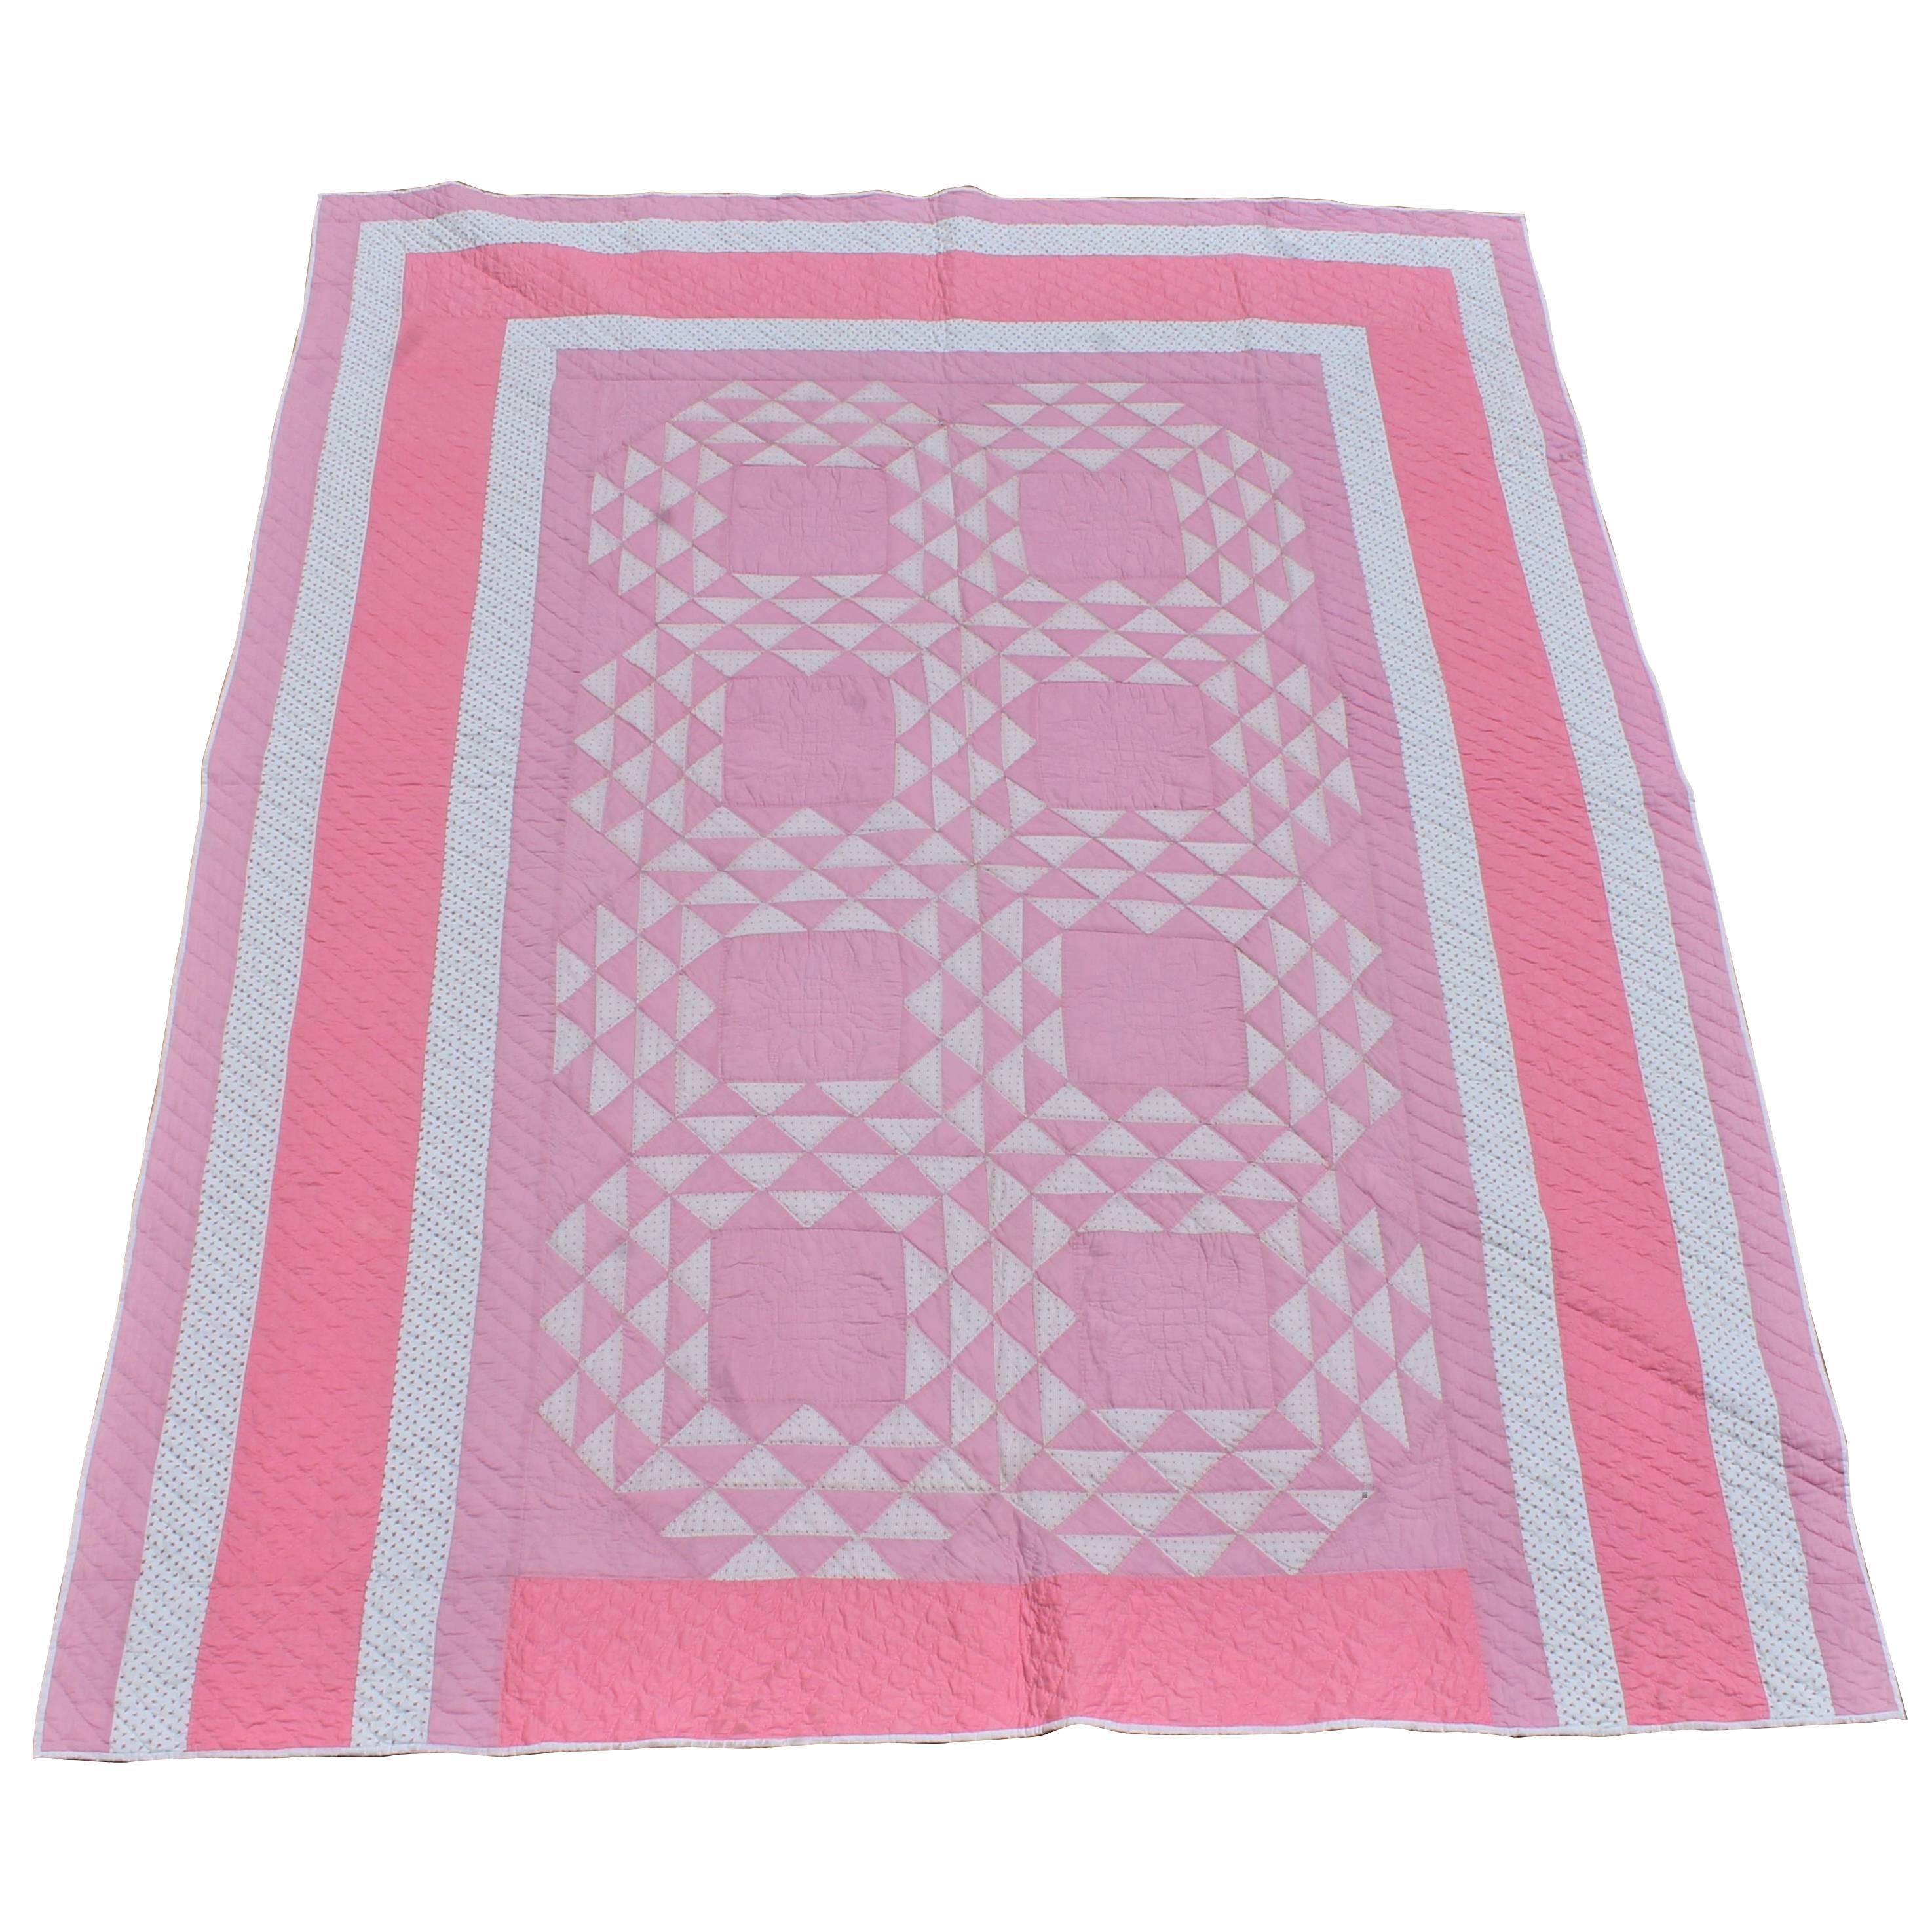 Pink and White Quilt in Contained Flying Geese Pattern